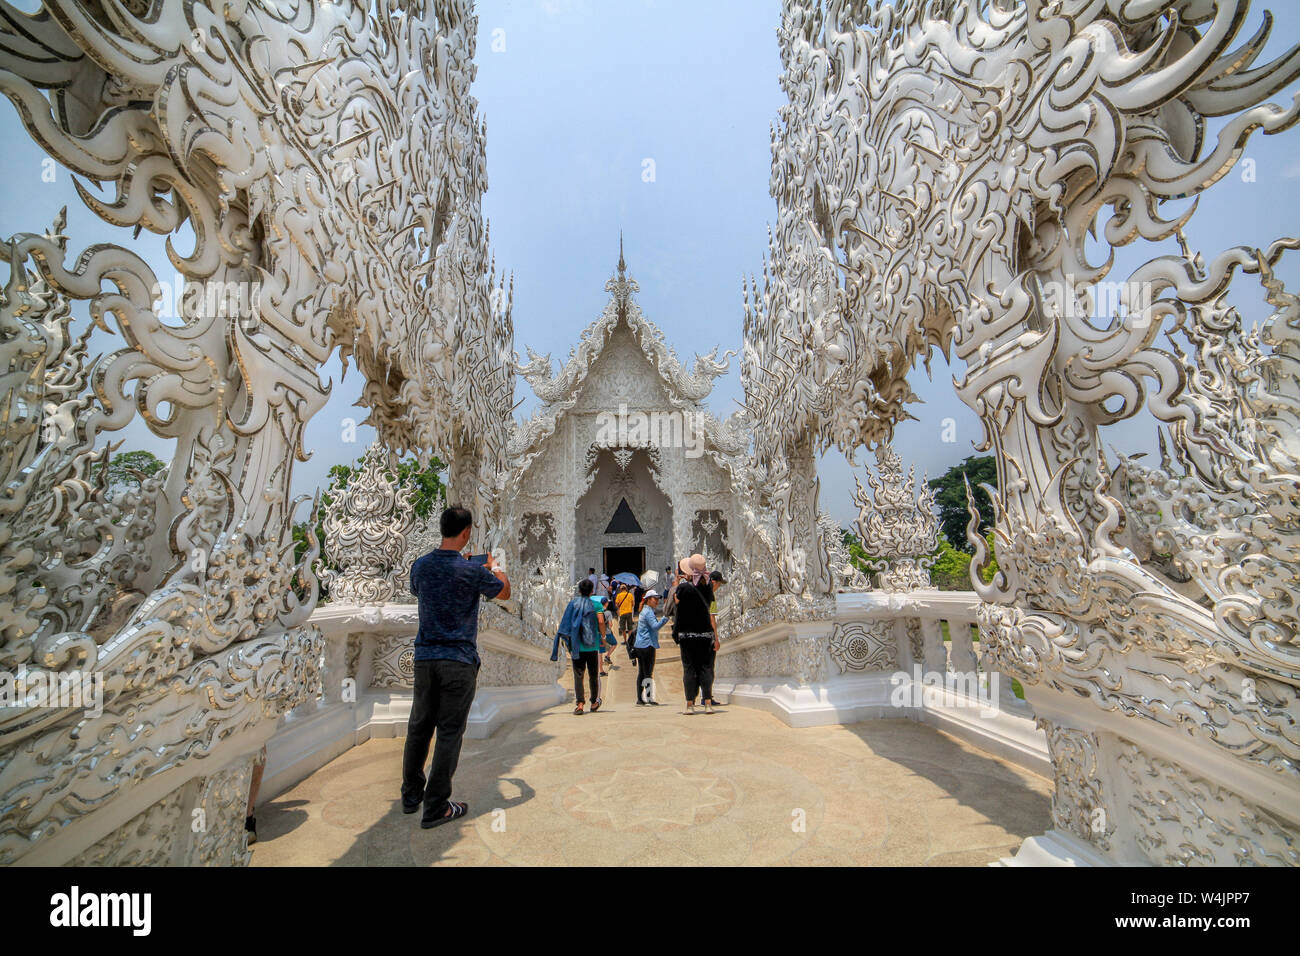 Tourists enter Wat Rong Khun, the White Temple, over The bridge of 'the cycle of rebirth' in Chiang Rai, Thailand. Stock Photo